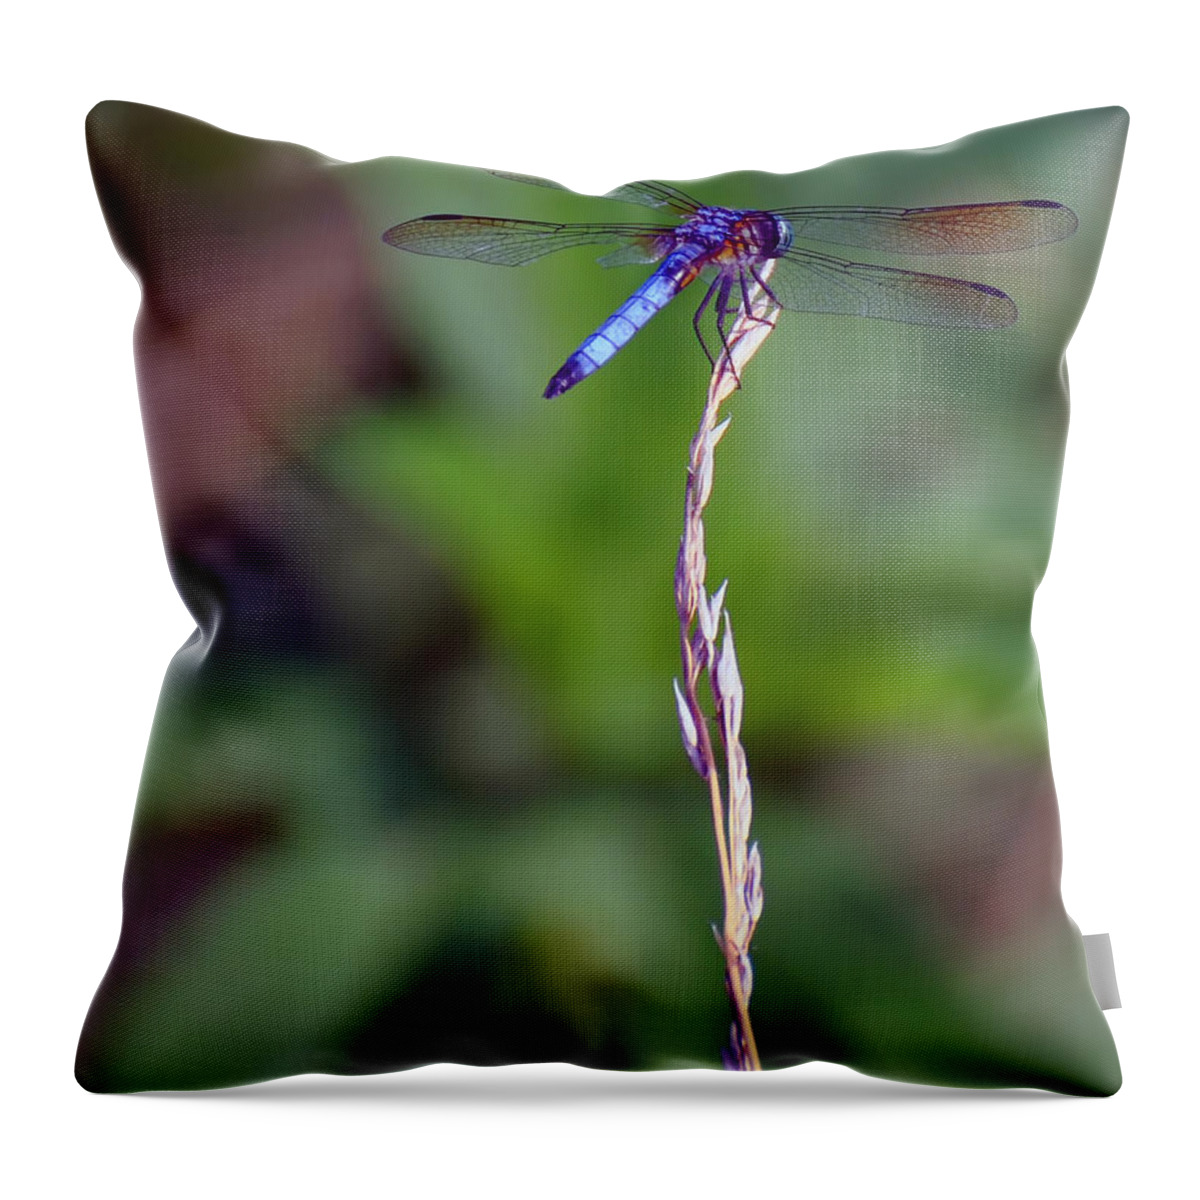 Dragonfly Throw Pillow featuring the photograph Blue Dragonfly On A Blade Of Grass by Flees Photos